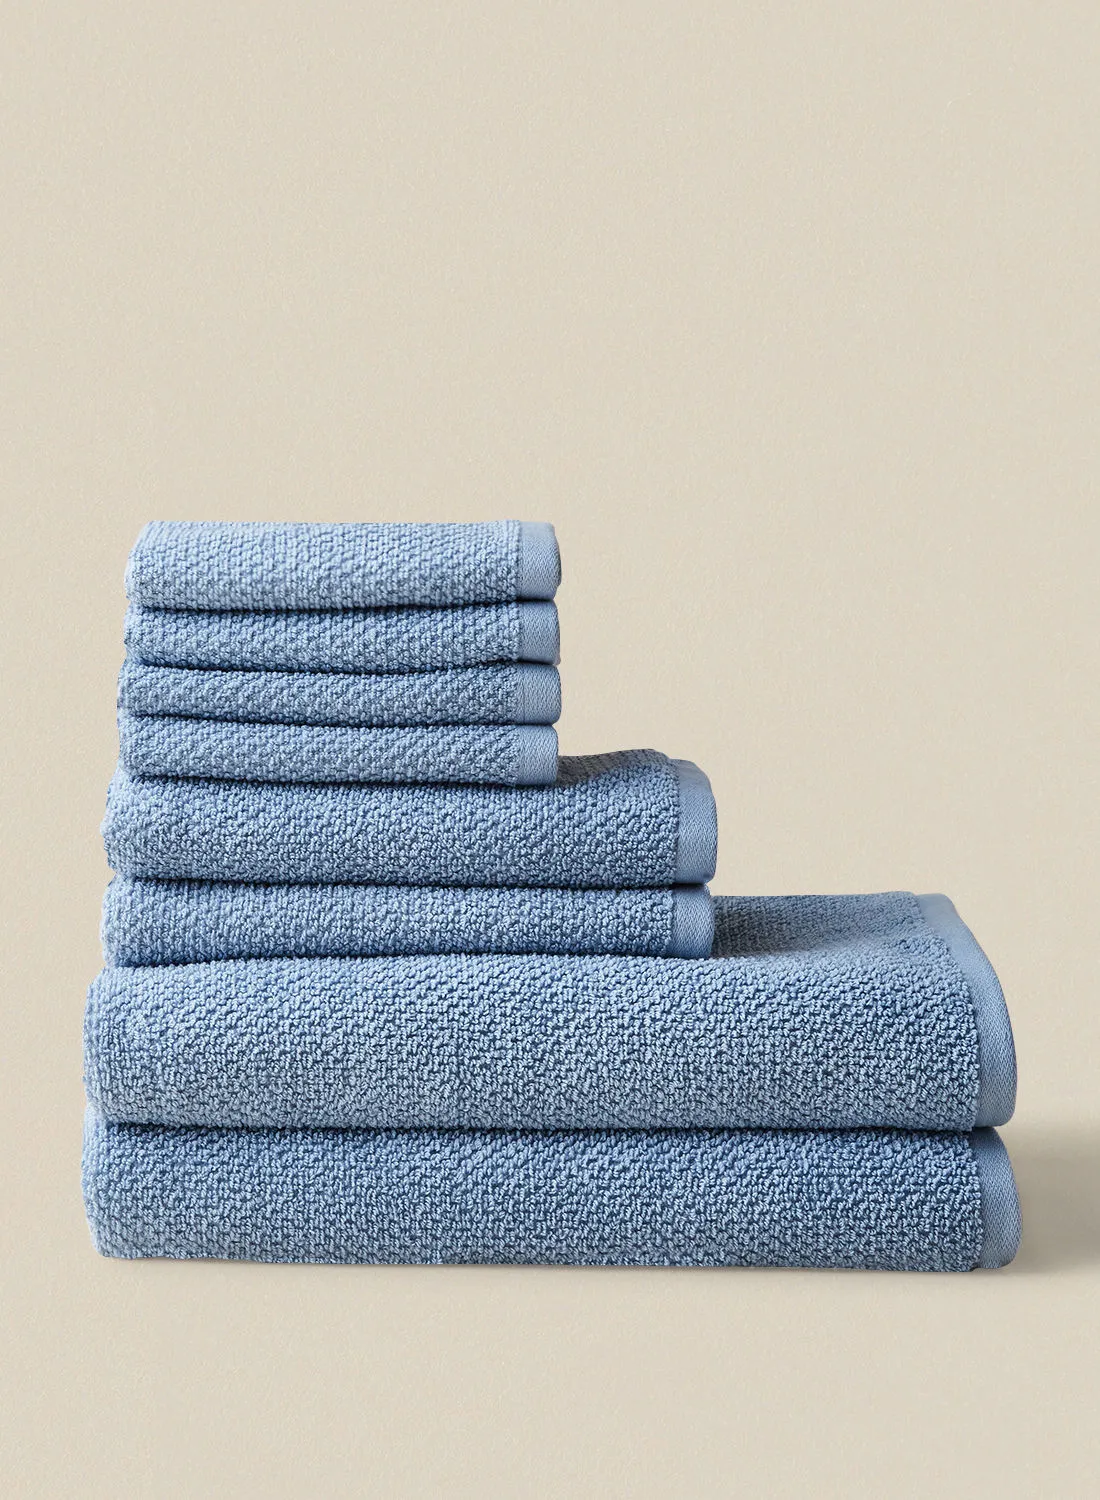 noon east 8 Piece Bathroom Towel Set - 500 GSM 100% Organic Cotton - 2 Hand Towel - 4 Face Towel - 2 Bath Towel - Blue Color - Highly Absorbent - Fast Dry